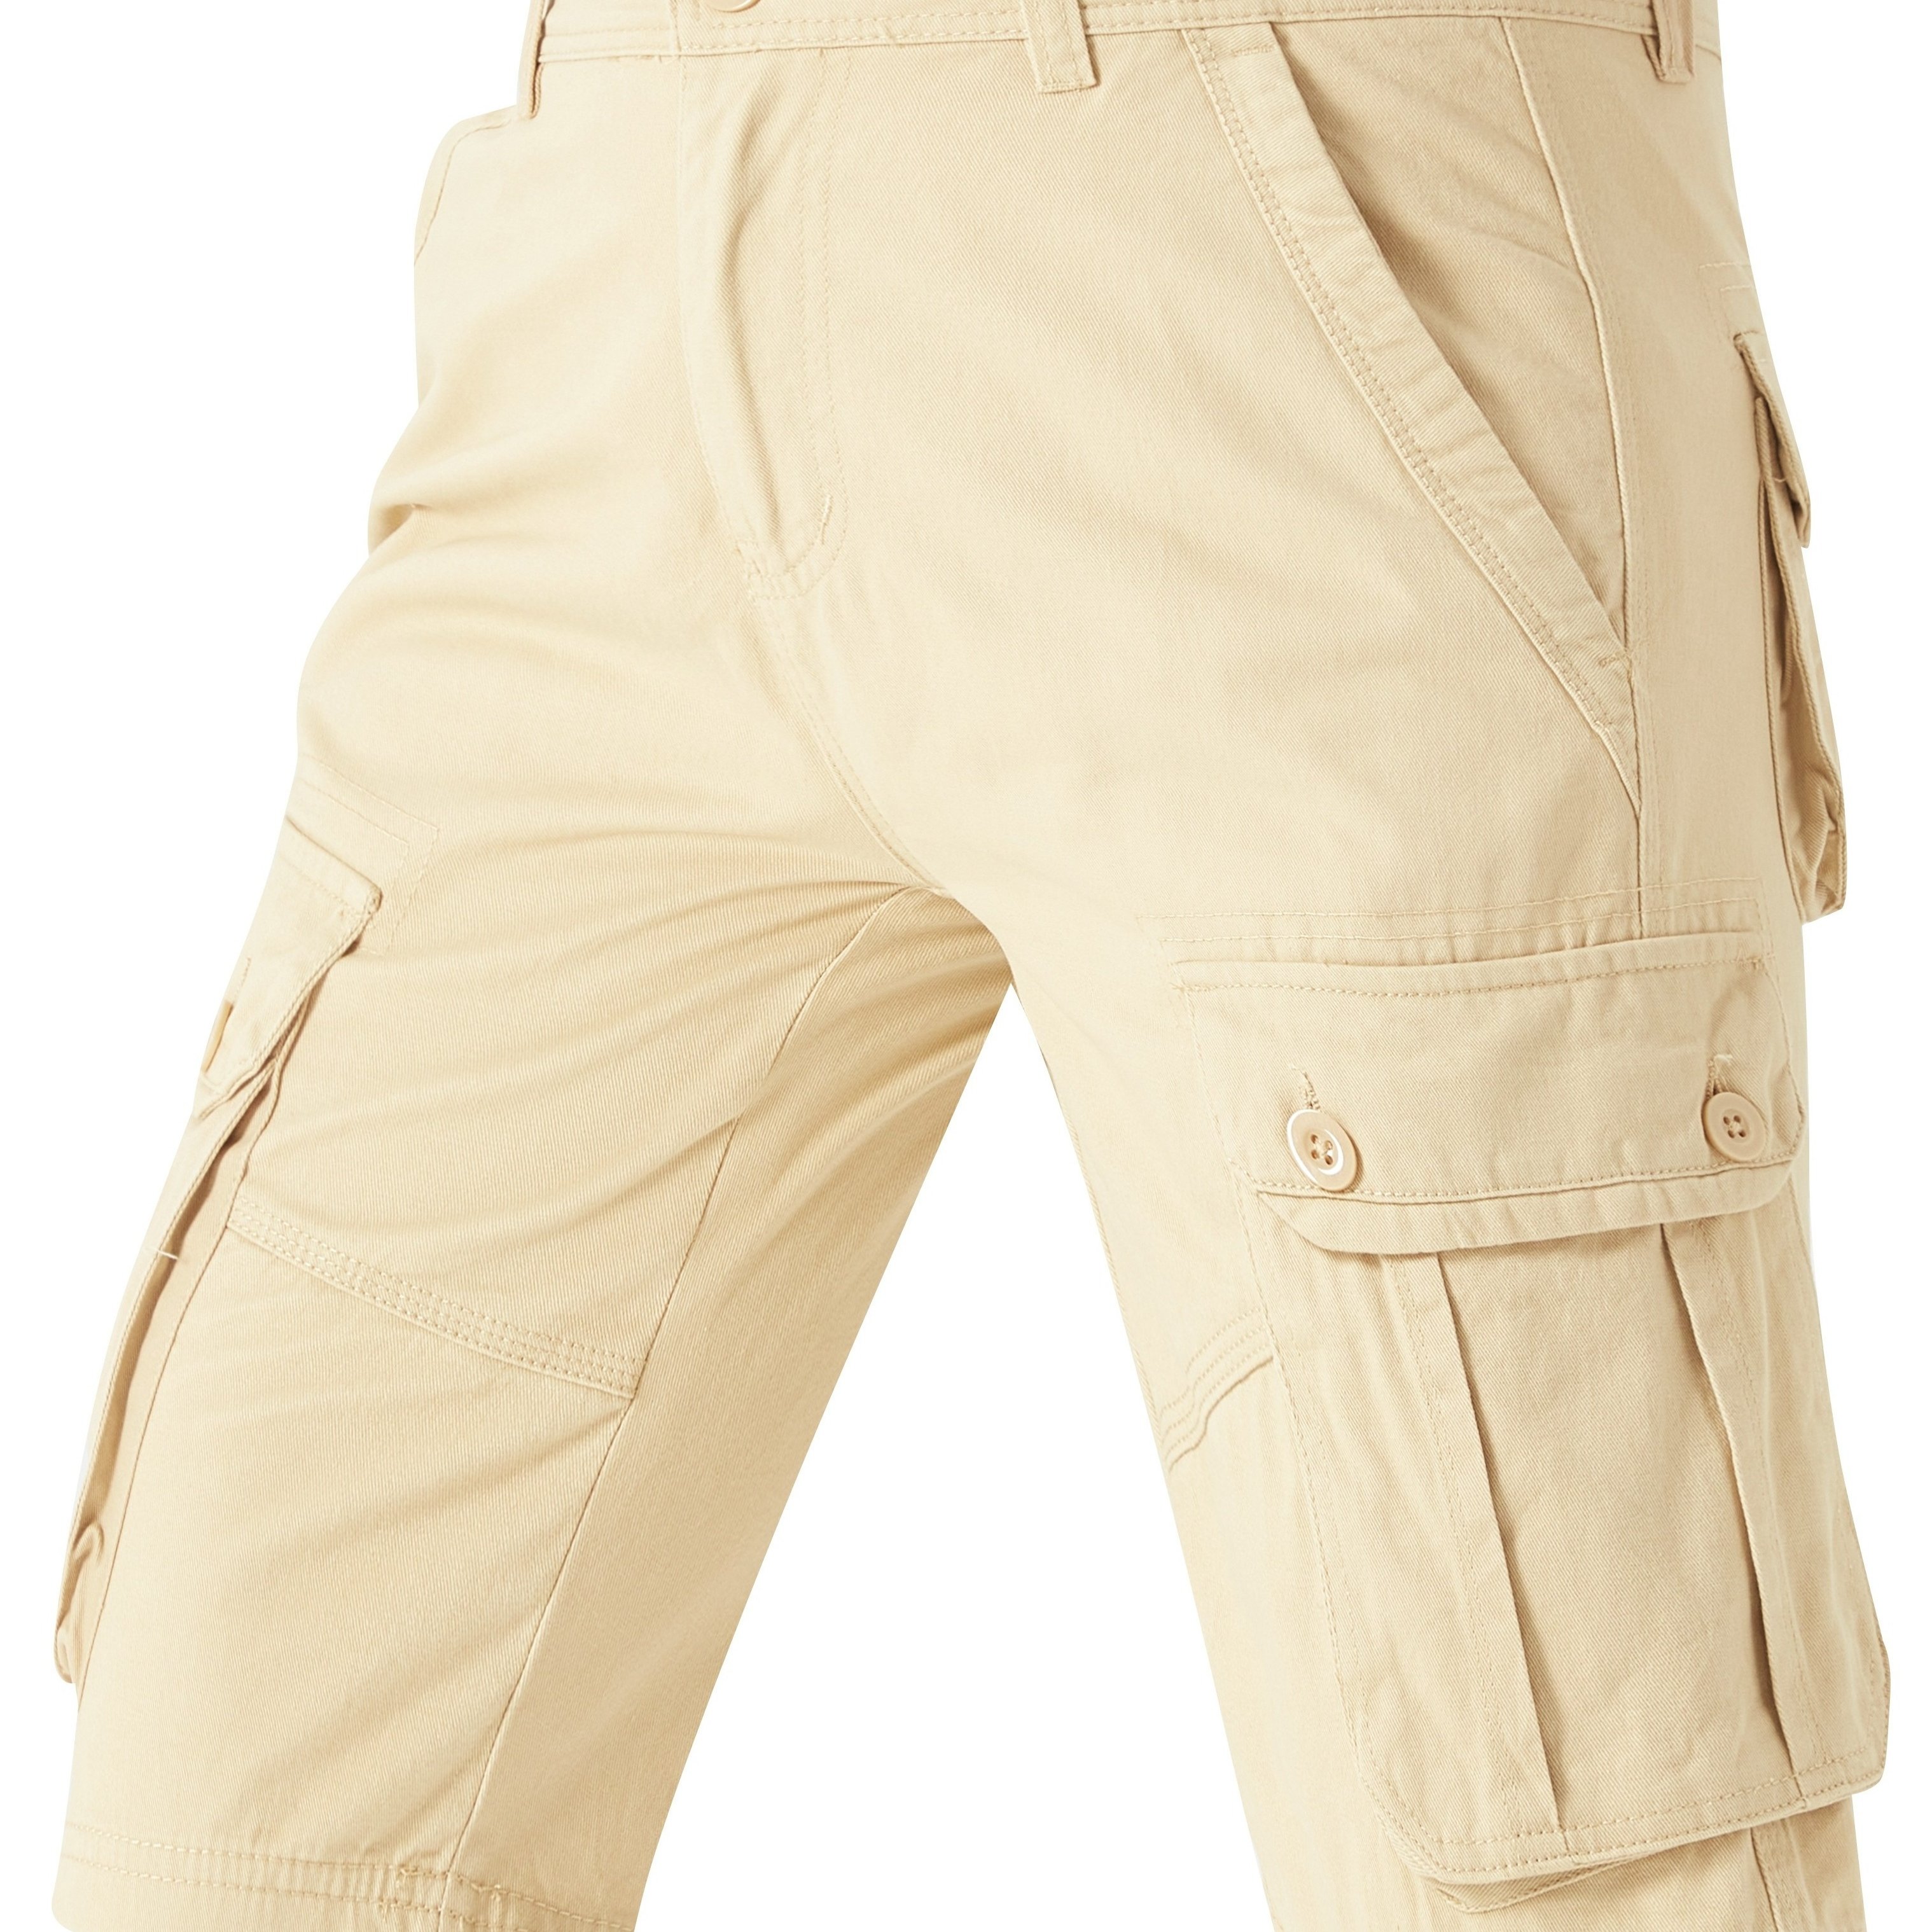 solid cargo mens cotton comfy shorts with multiple pockets summer outdoor fishing hiking camping